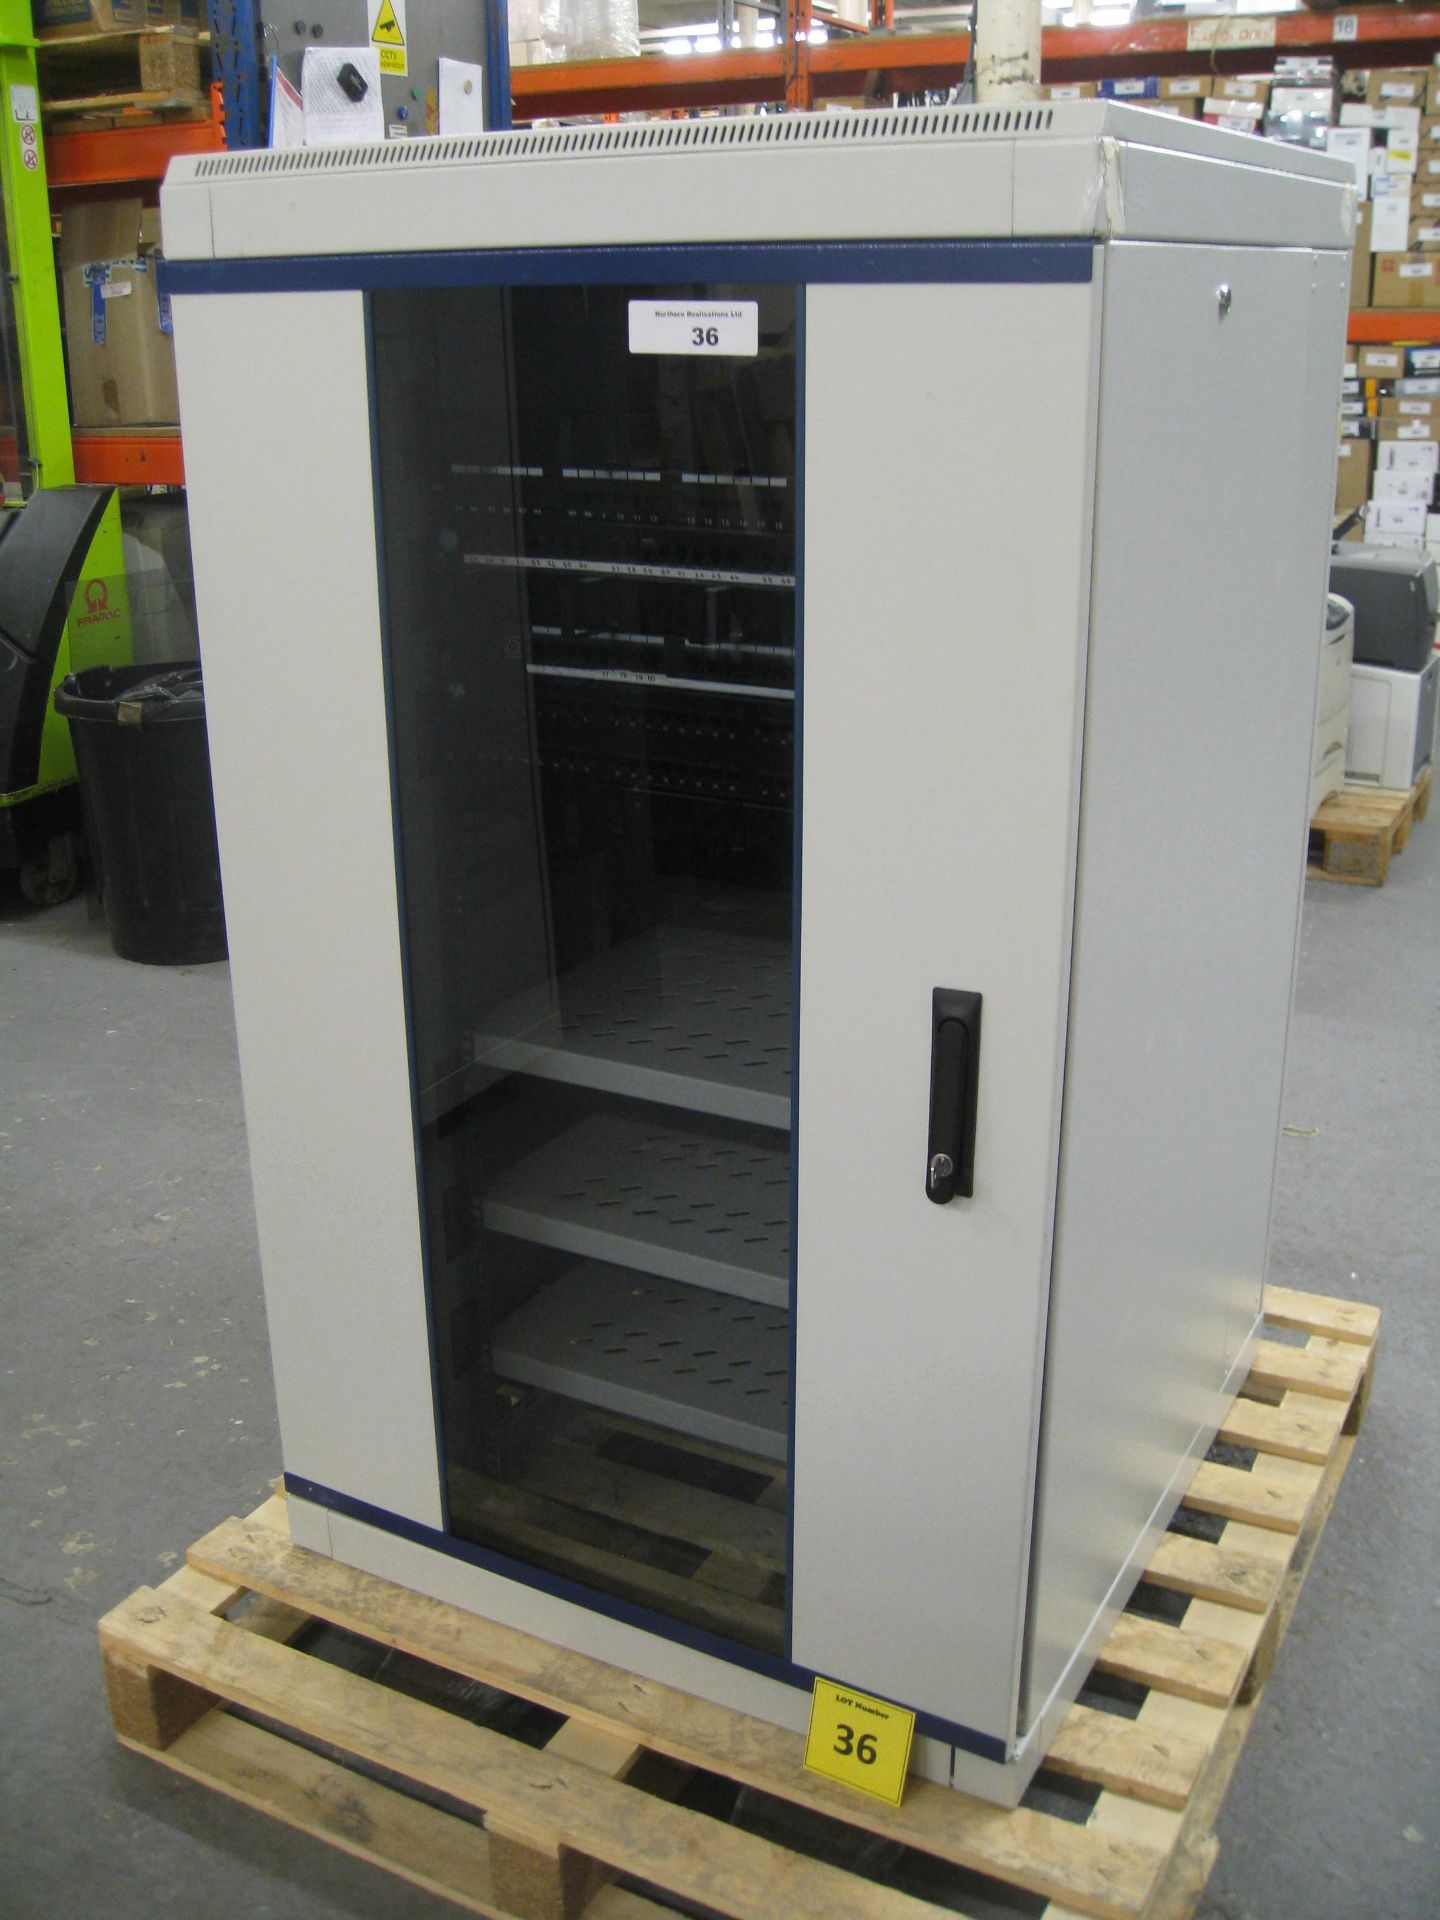 COMMS CABINET. 127CM TALL, 78CM WIDE & 82CM DEEP. WITH 3 SHELVES, 4 X PATCH PANELS AND FAN PANE;L ON